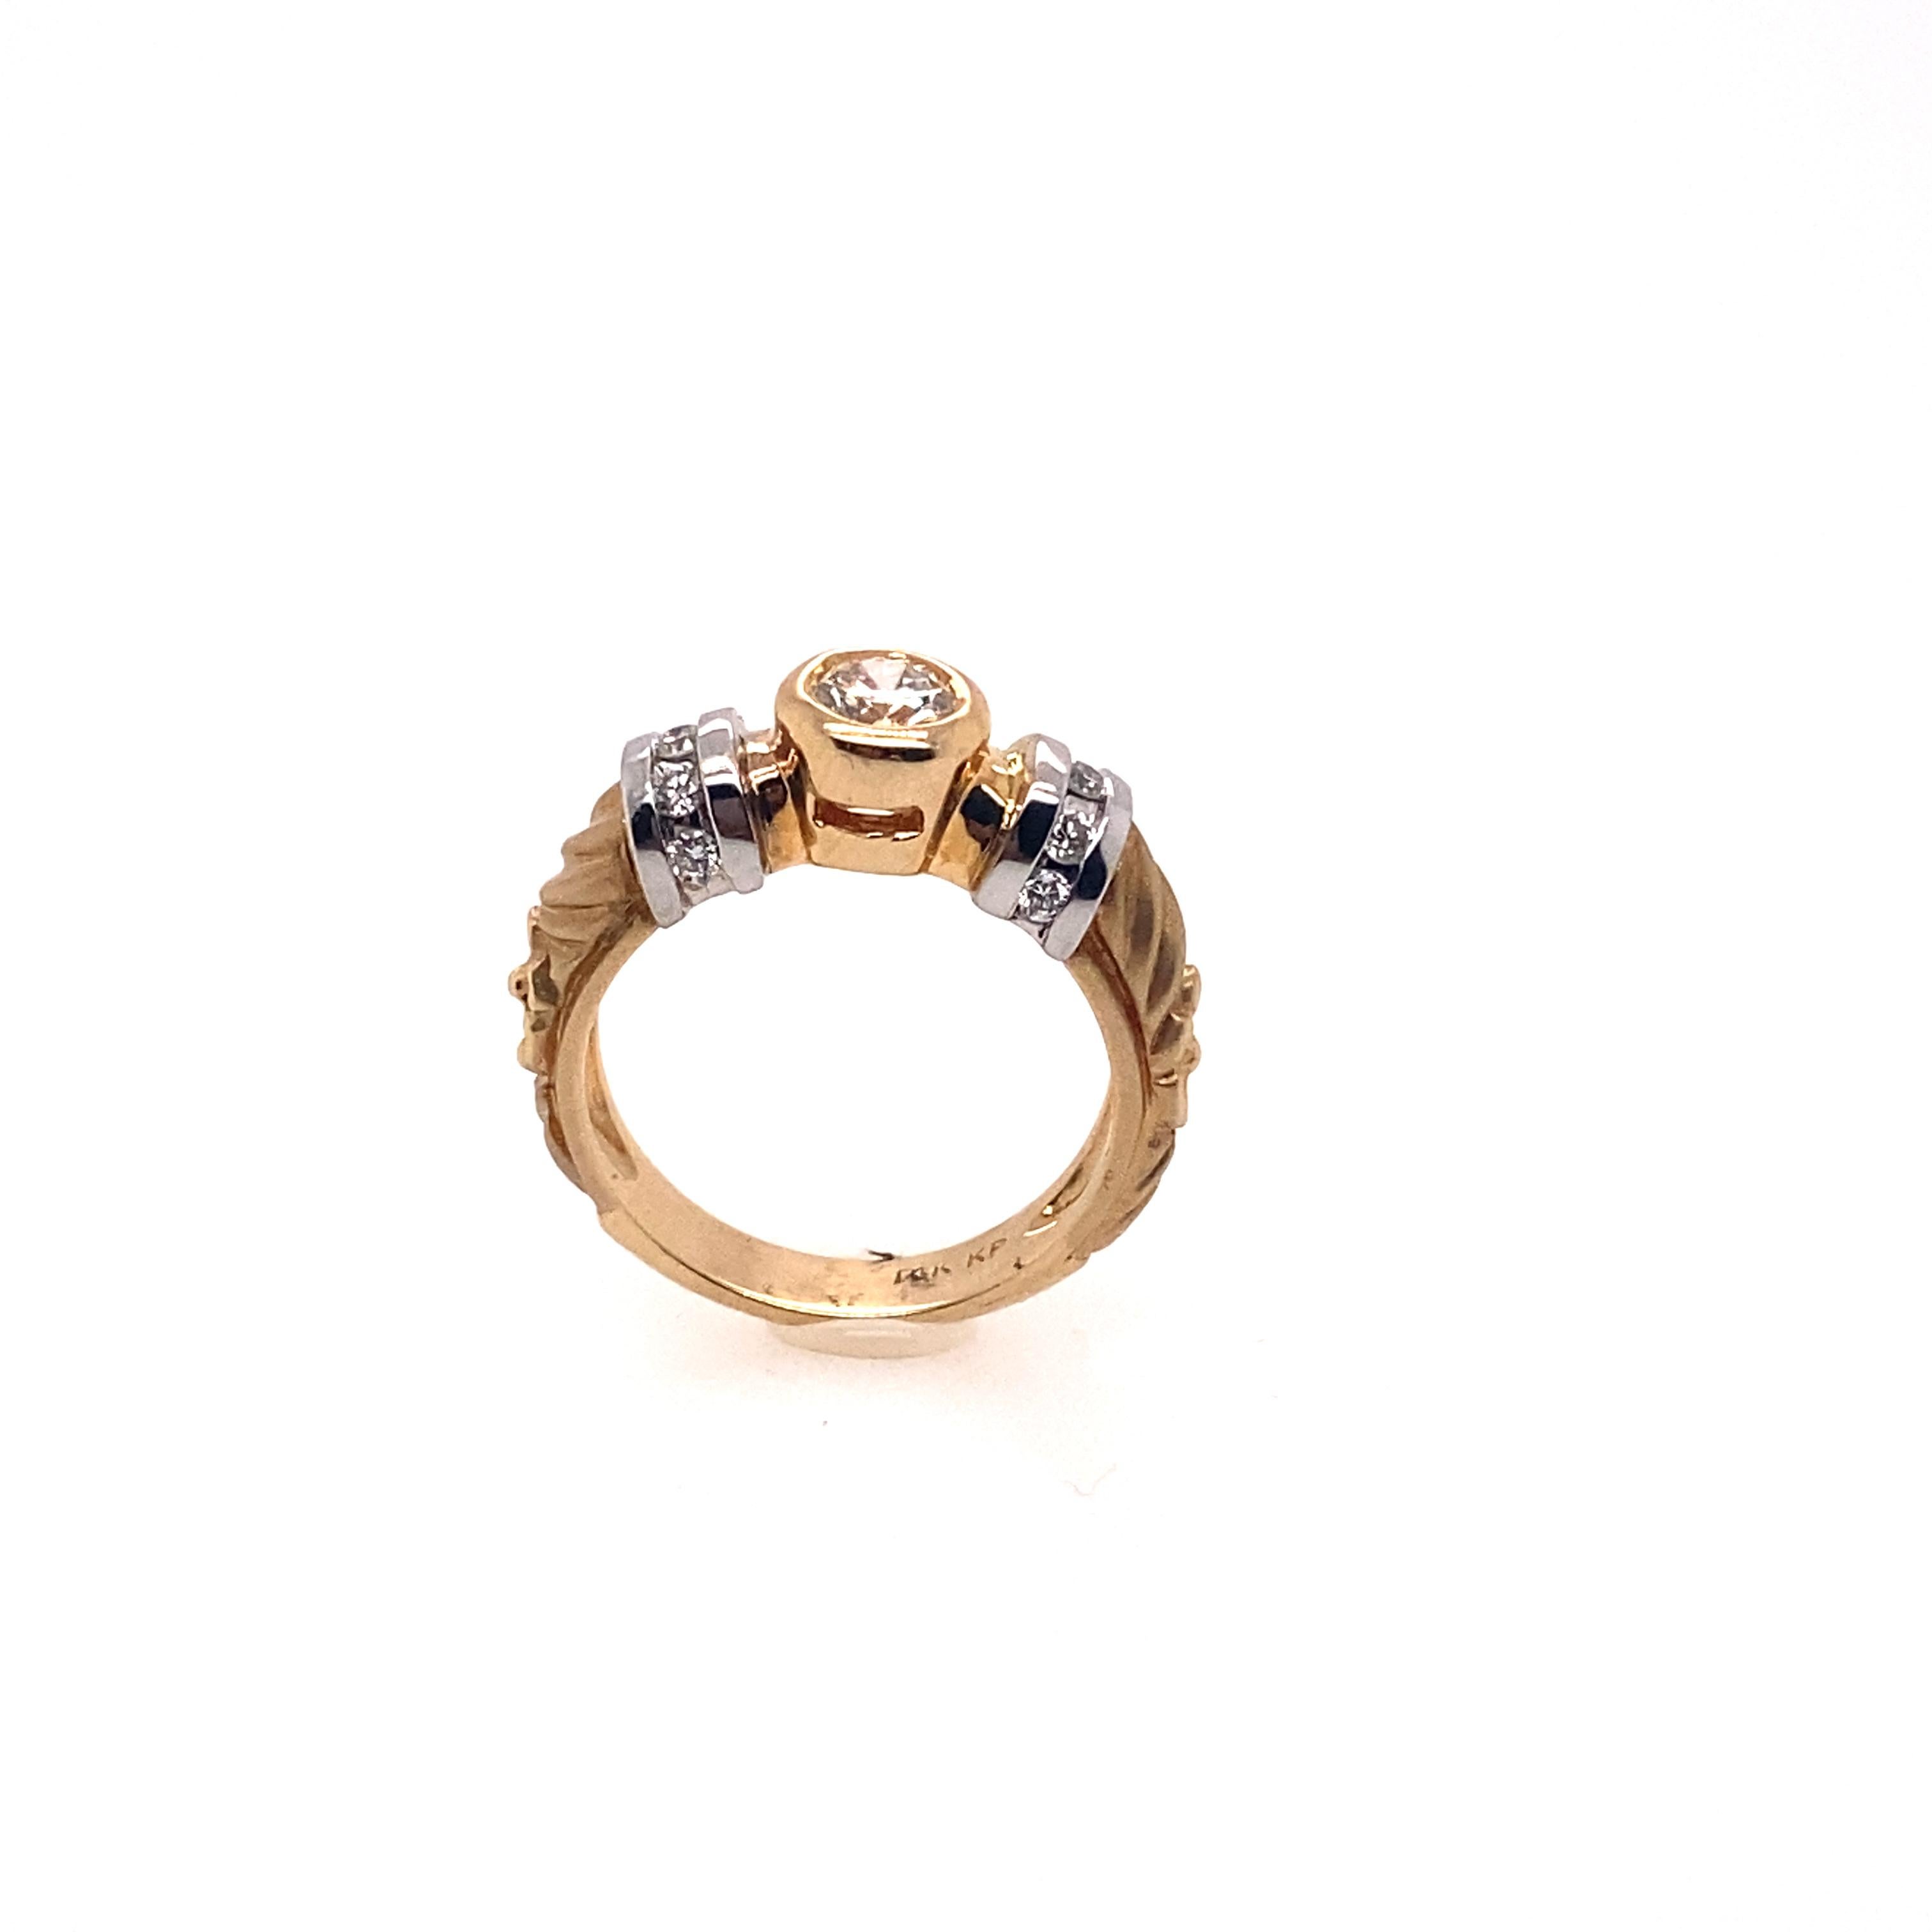 The whole shank of the ring is hand-engraved art and the shoulder of the ring is coated by the white gold and side diamonds. 0.72 carat round diamond is mounted as a center stone and this two-tone gold ring is very unique and classy. 

Center